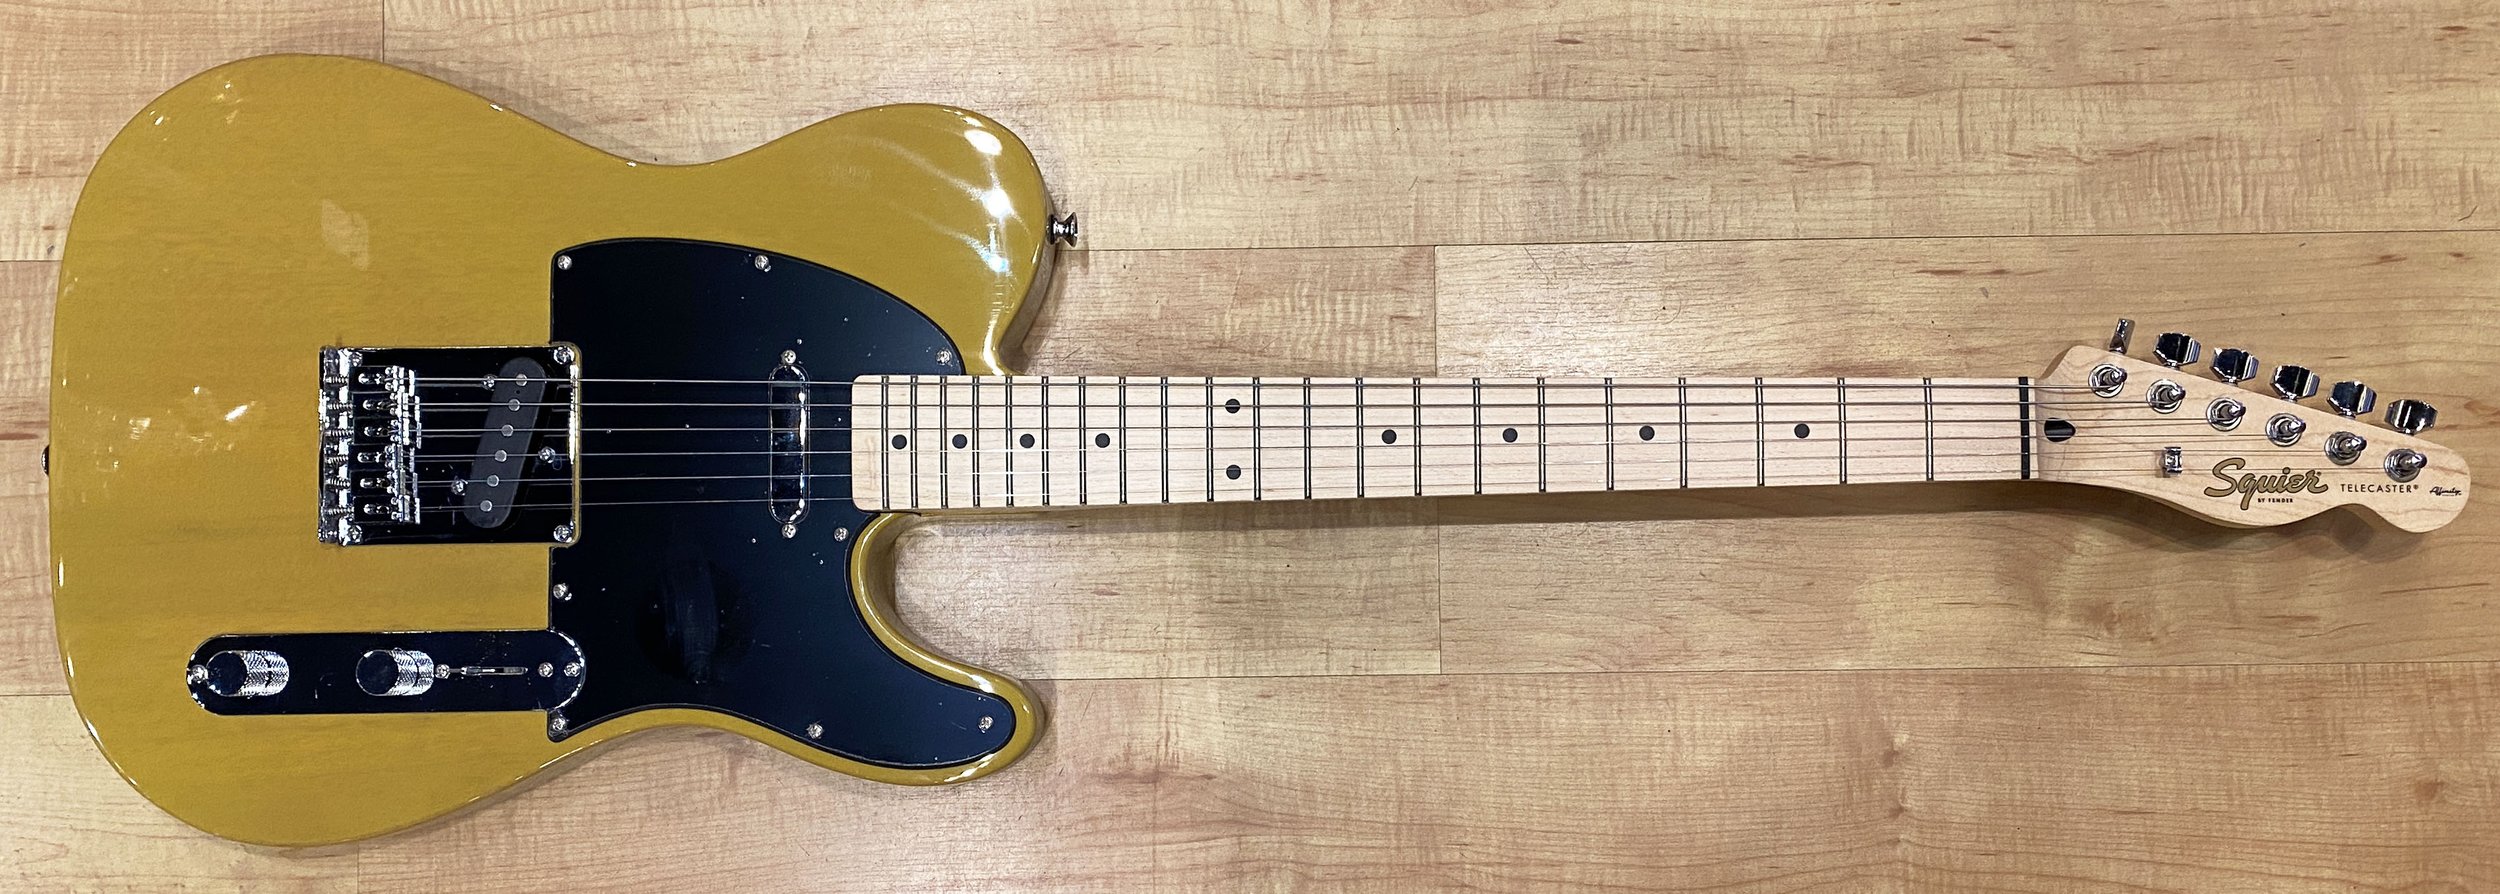 Squier Affinity Series Telecaster Electric Guitar Butterscotch Blonde —  Andy Babiuk's Fab Gear